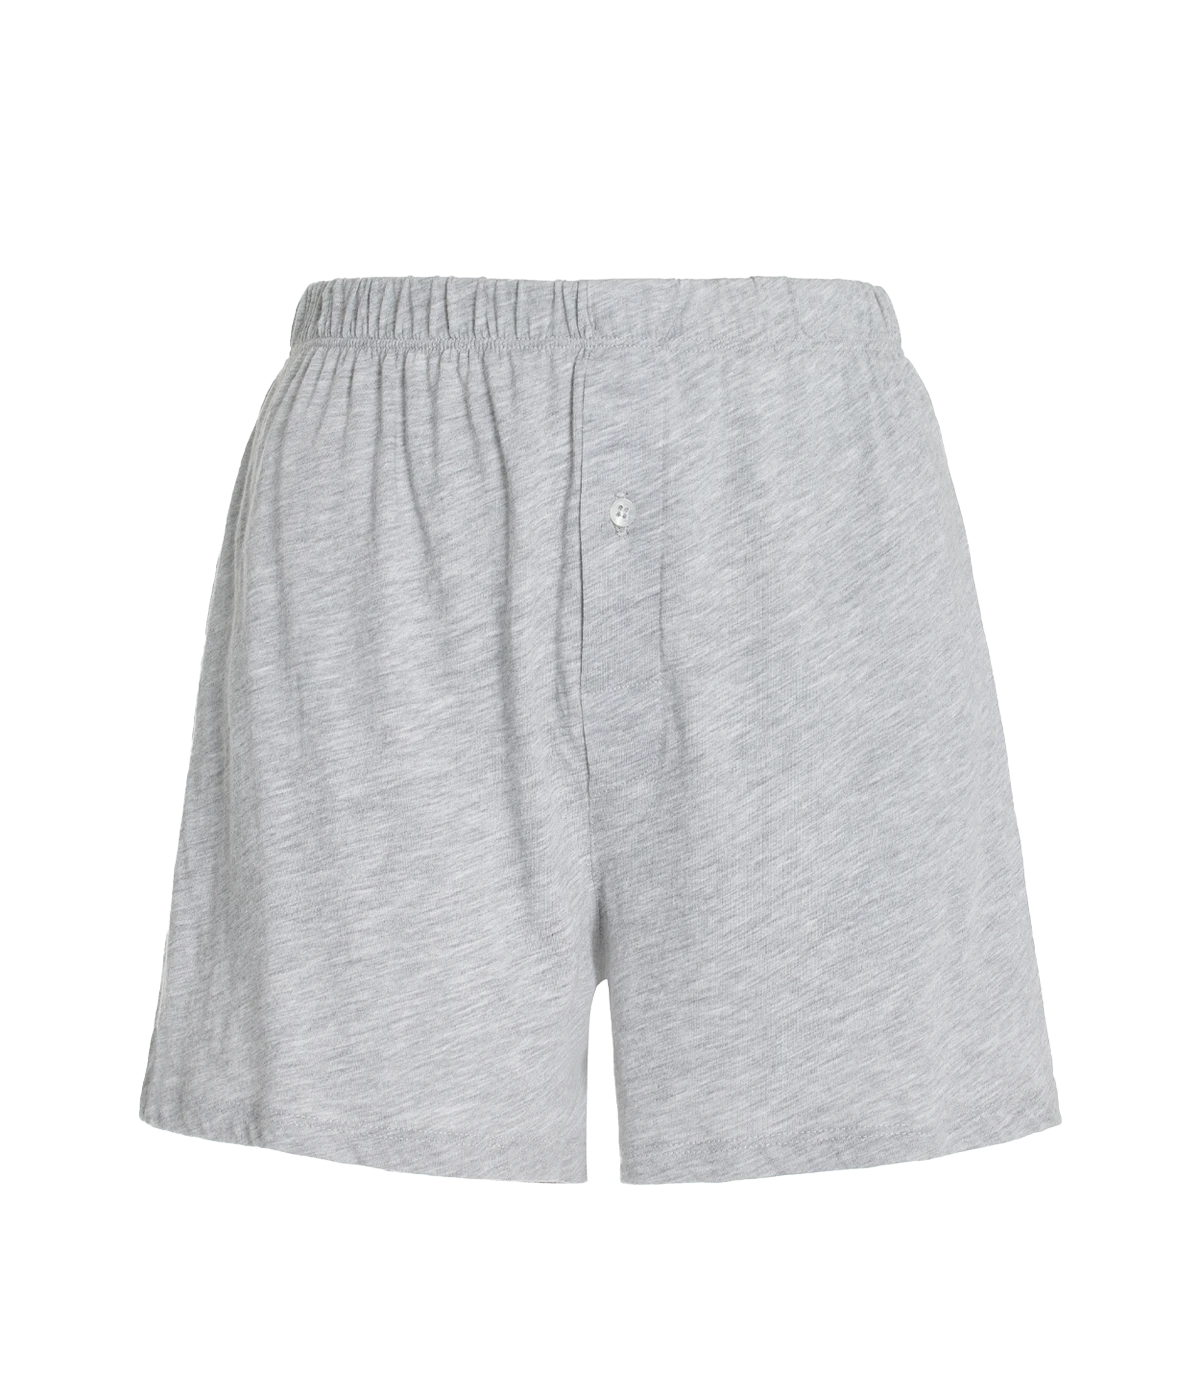 Lounge Boxer Short in Heather Grey